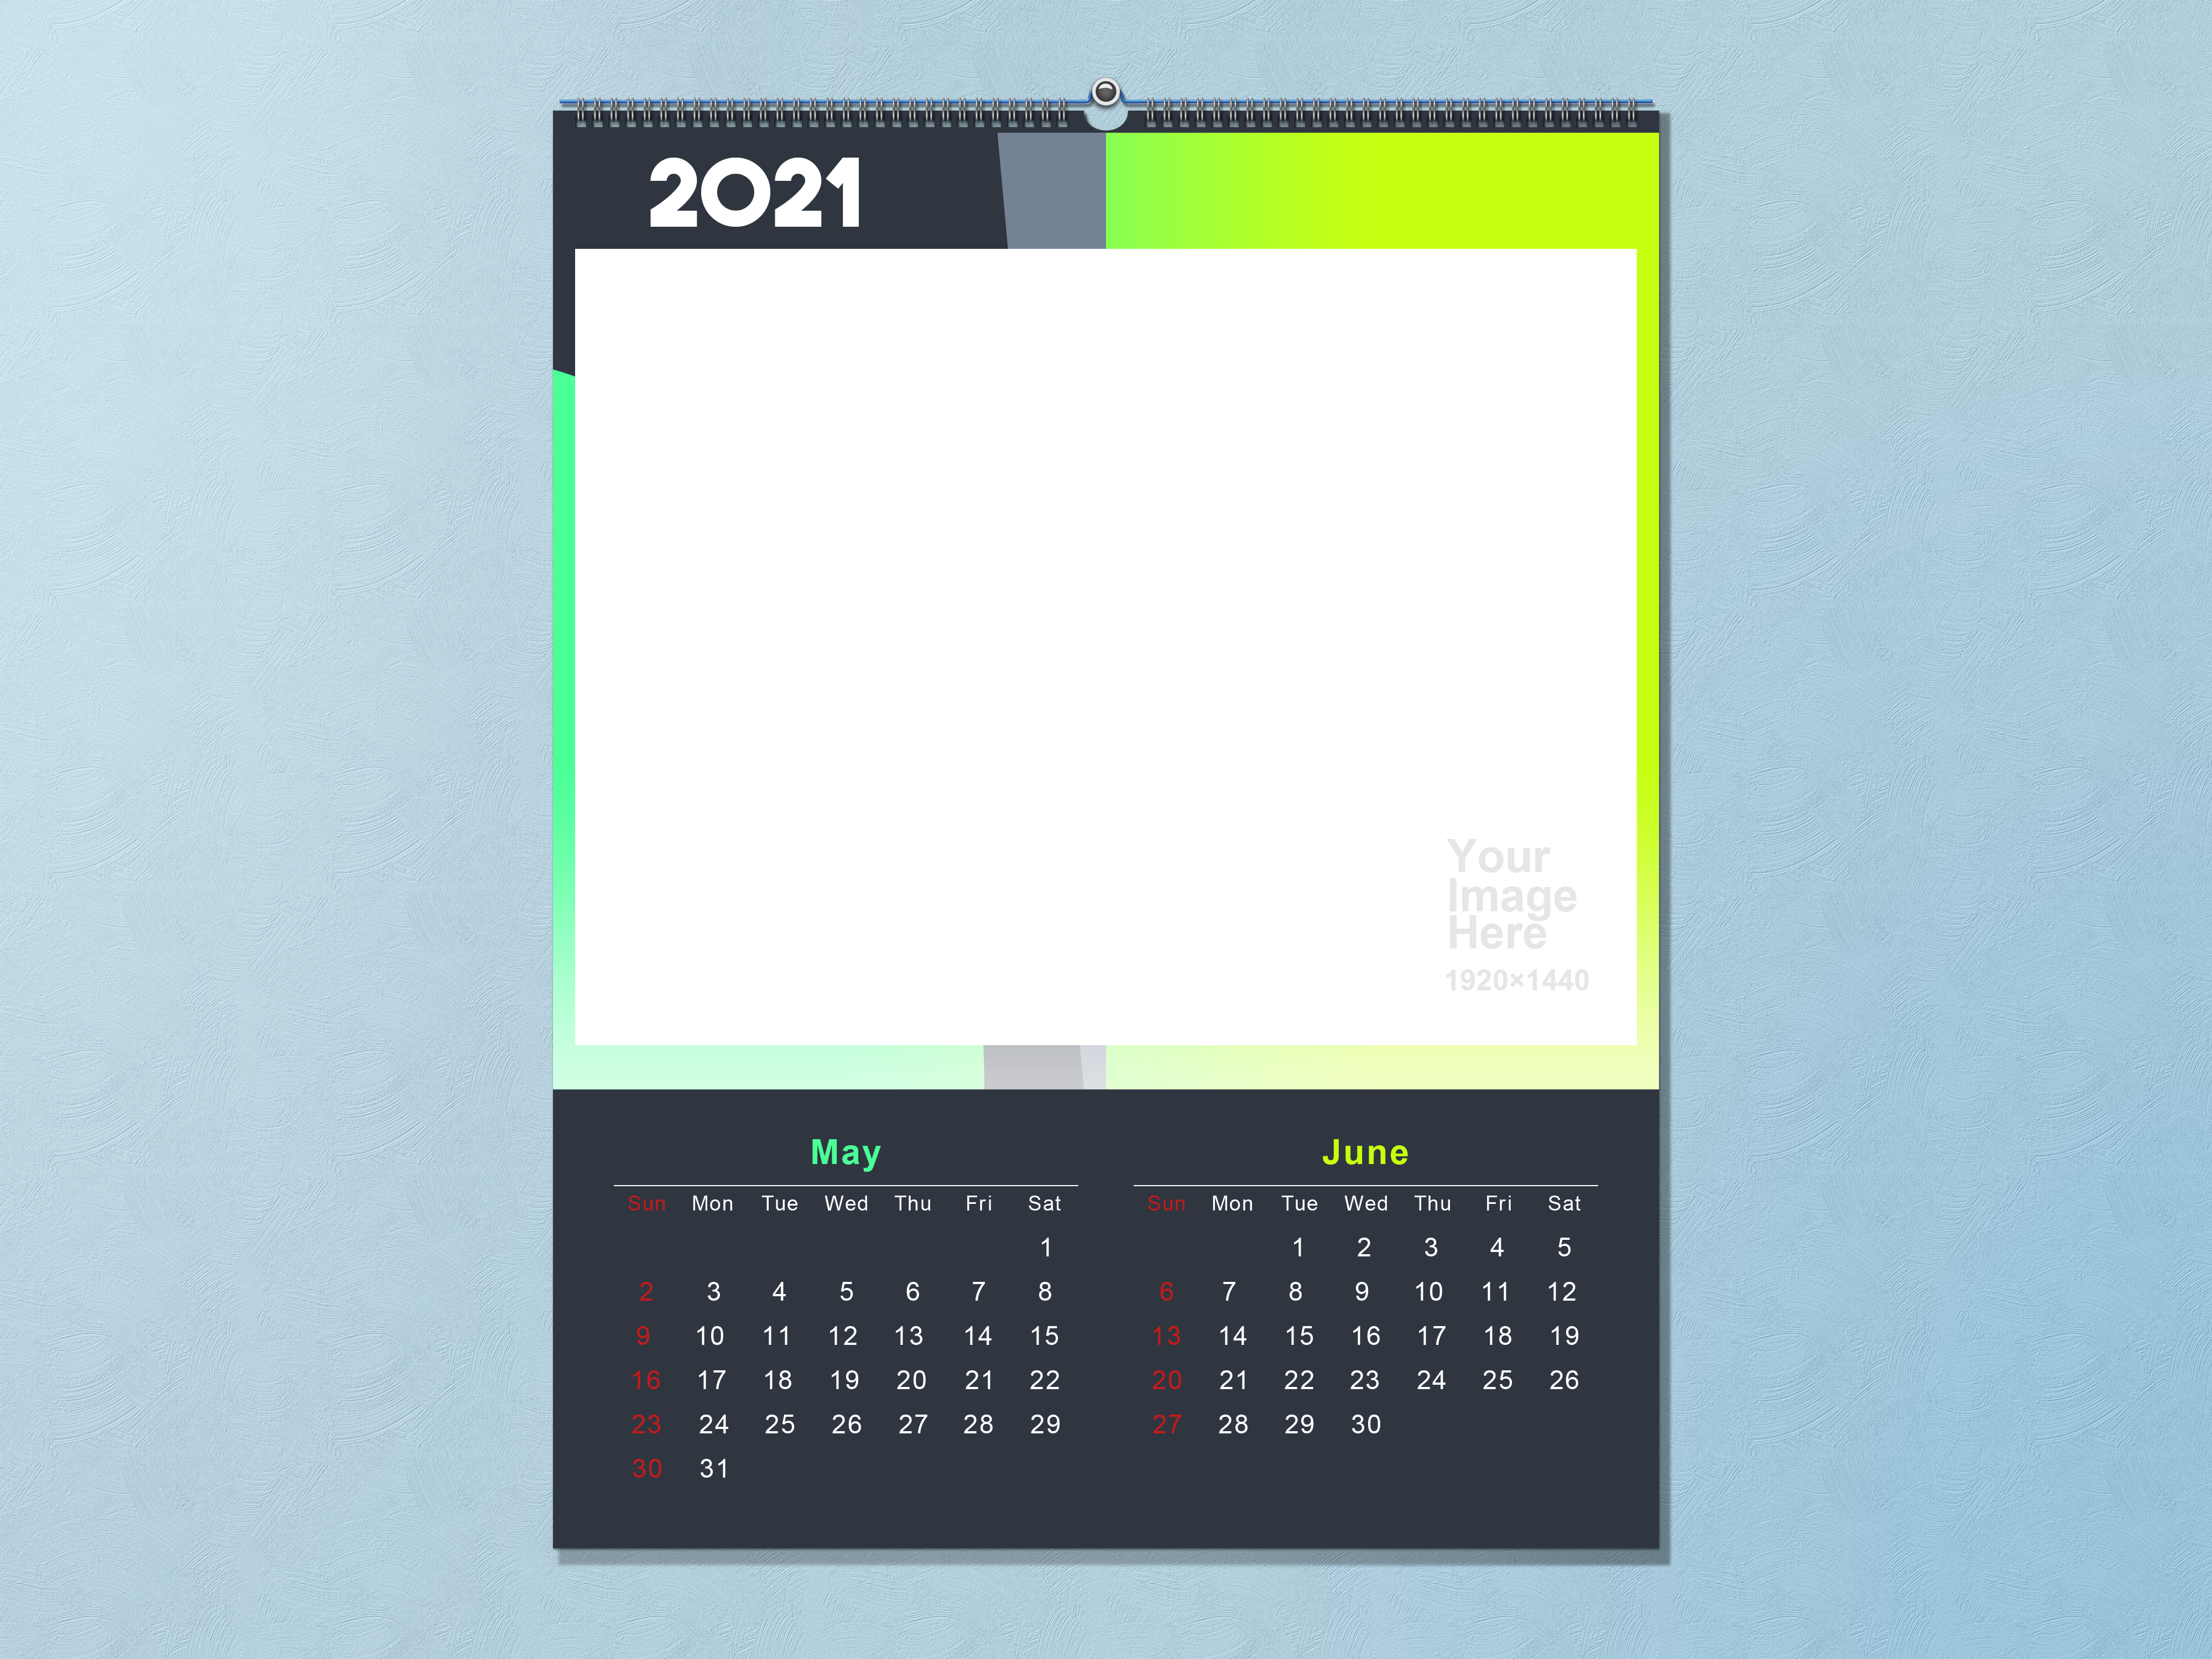 General 4000x3000 template May June calendar 2021 (Year) simple background cyan background numbers